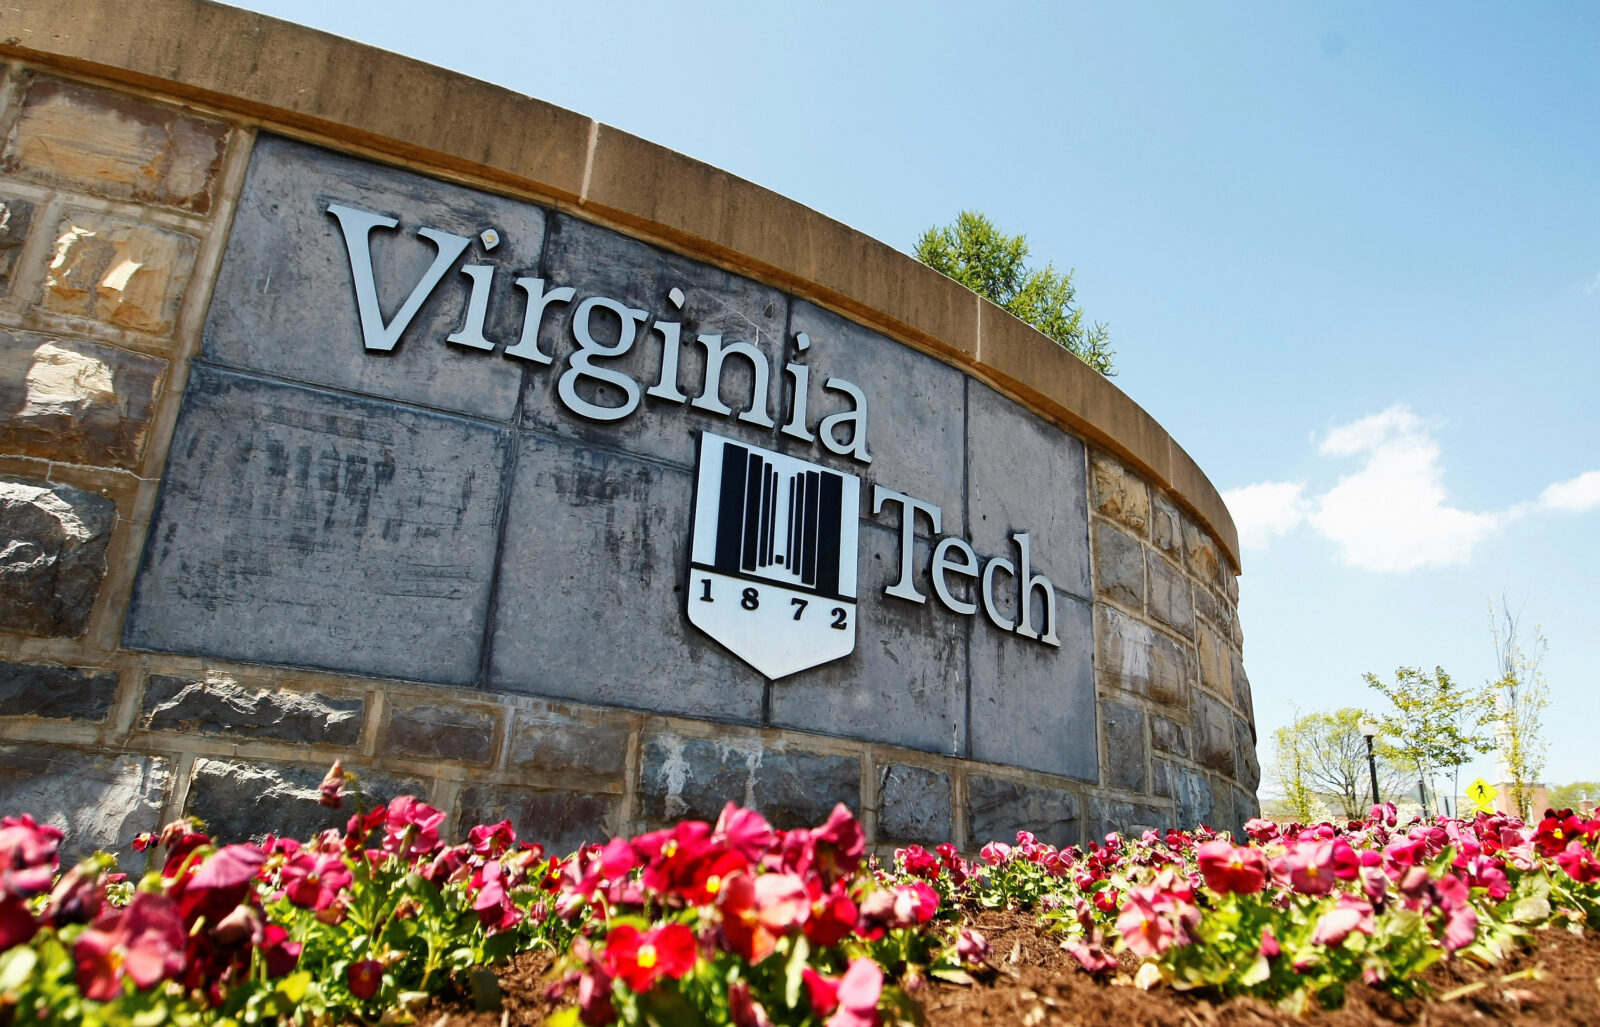 Supreme Court Rejects Challenge to Virginia Tech's Bias-Response Protocol